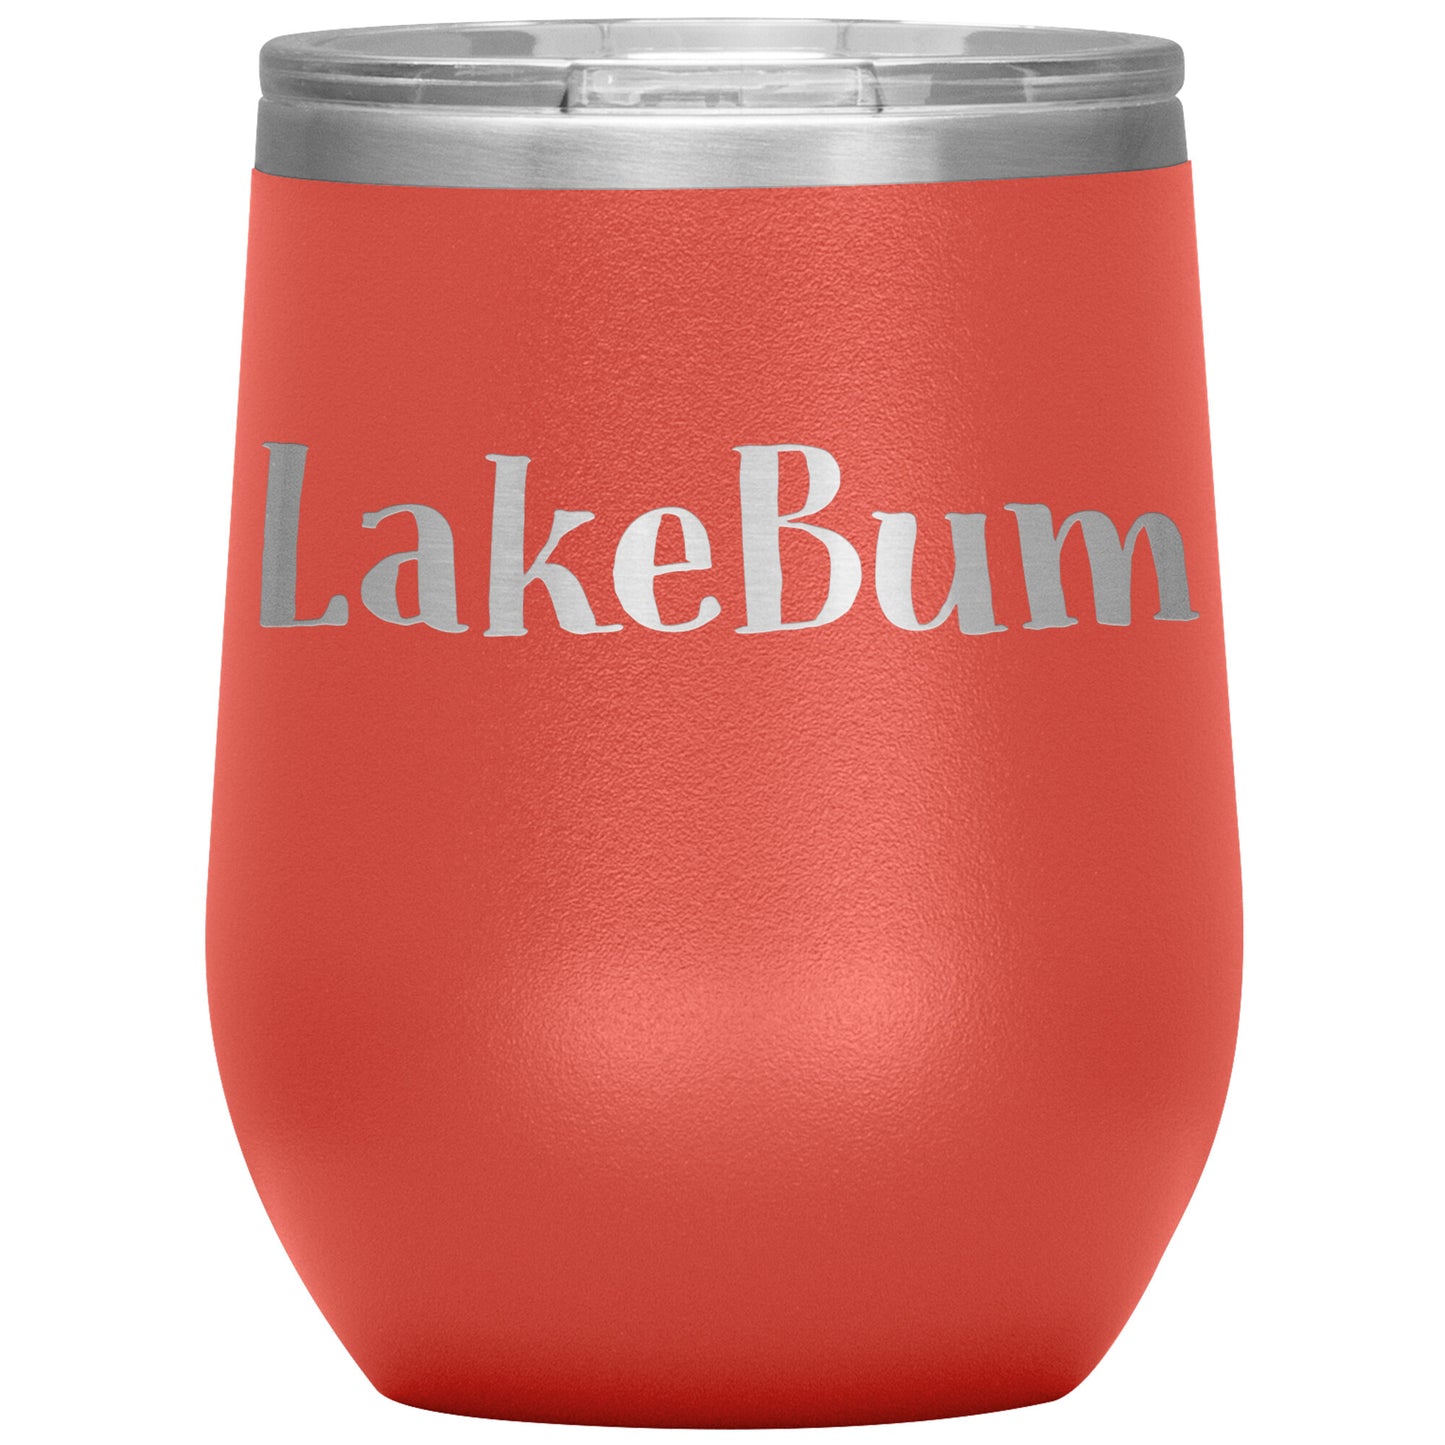 Lake Bum 12oz Wine Tumbler - Funny Stemless Cup With Lid